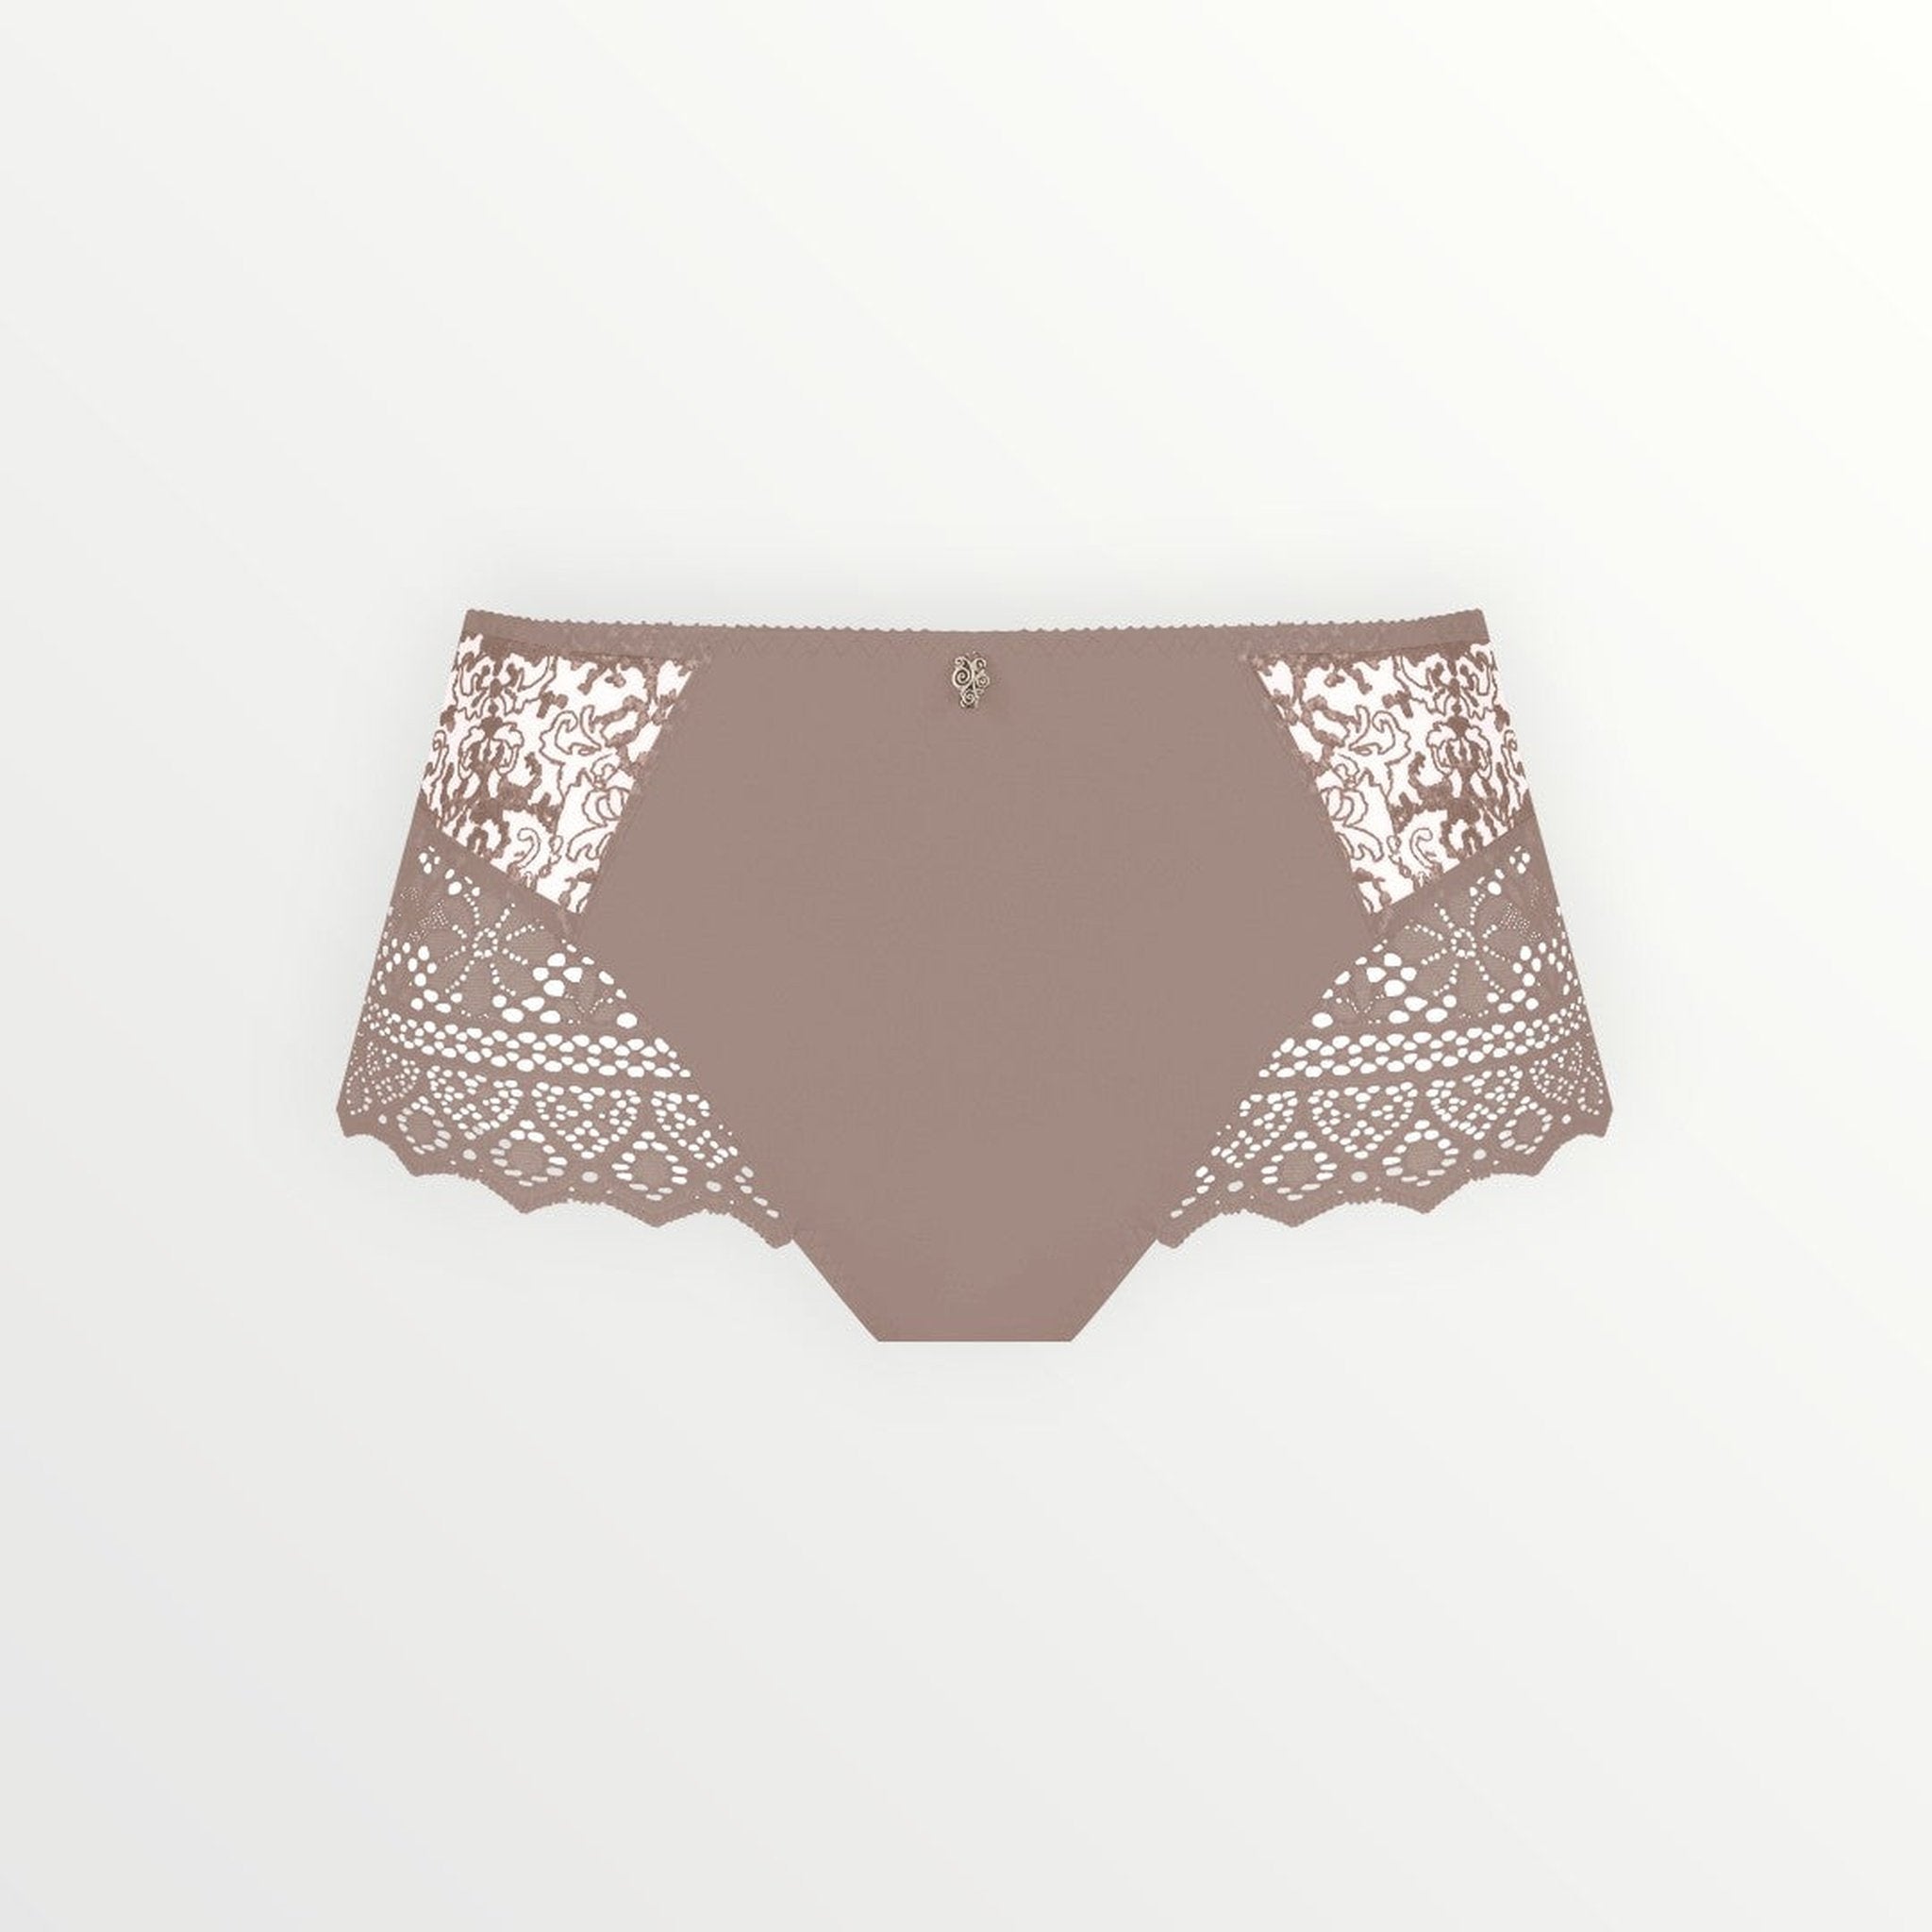 Empreinte Cassiopee Panty in Rose Sauvage color with elegant lace detailing